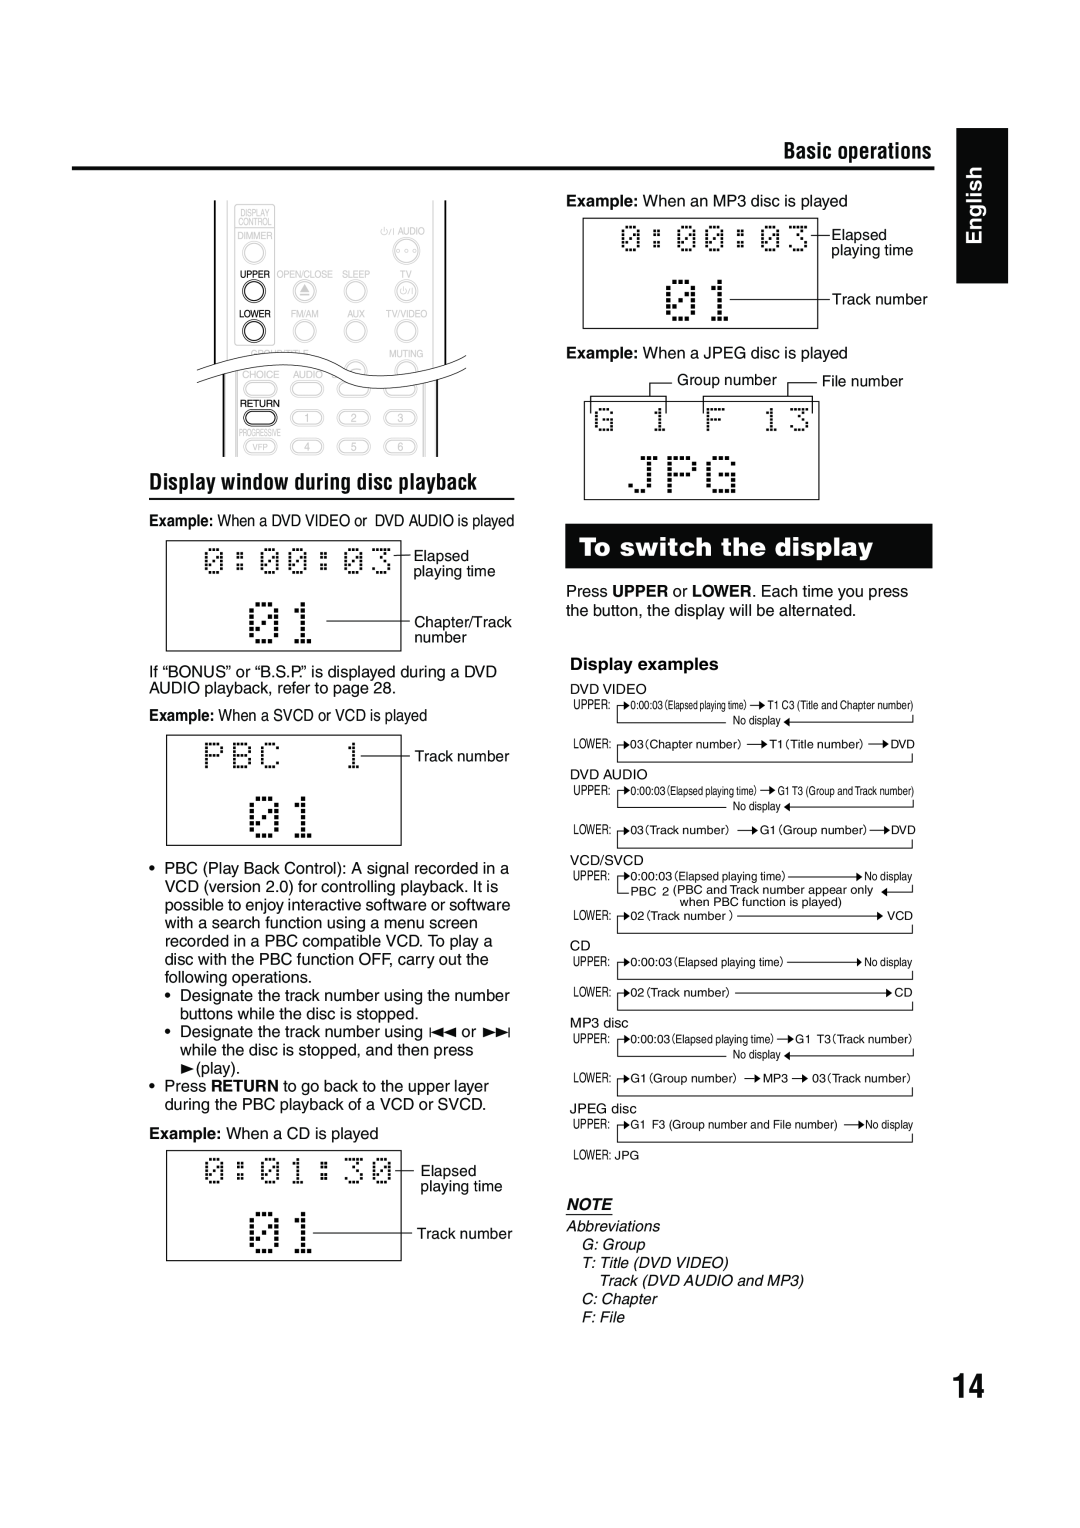 JVC EX-A5 manual To switch the display, Display window during disc playback, Display examples, Basic operations, English 